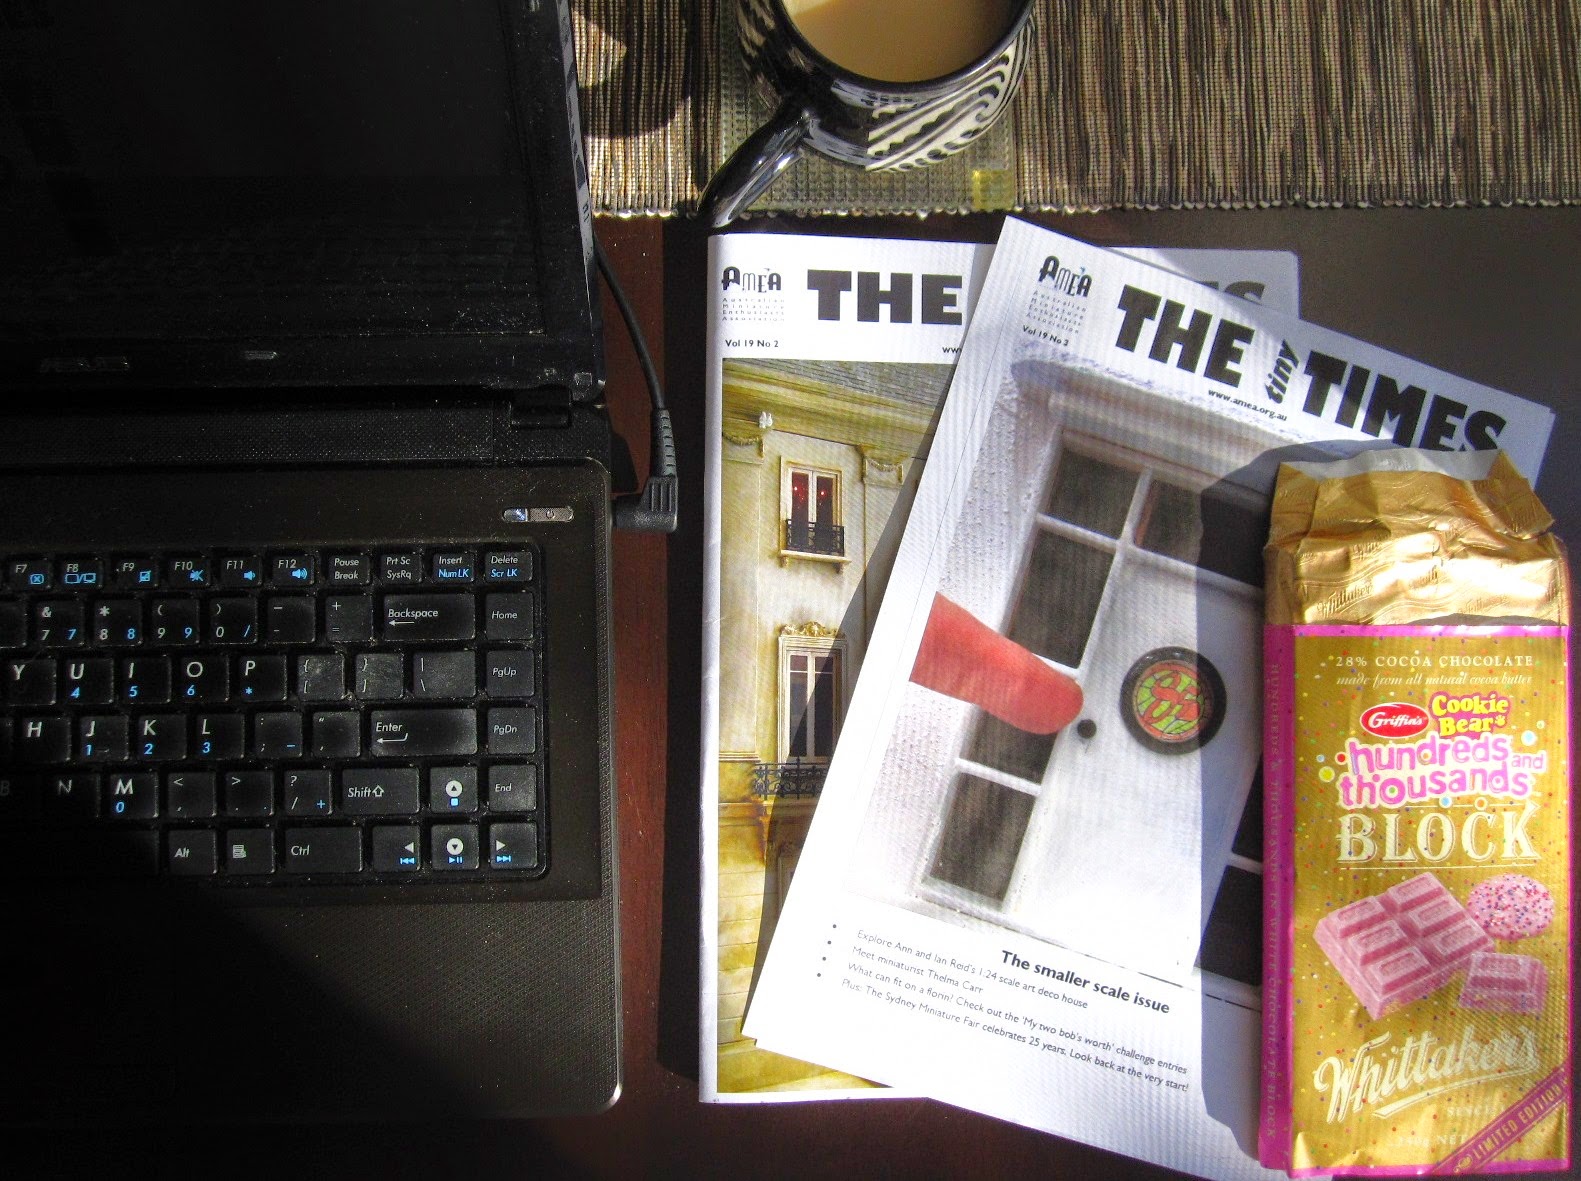 Laptop and mug of tea, with two issues of The tiny Times and a bar of Whittaker's hundreds and thousands chocolate next to it.